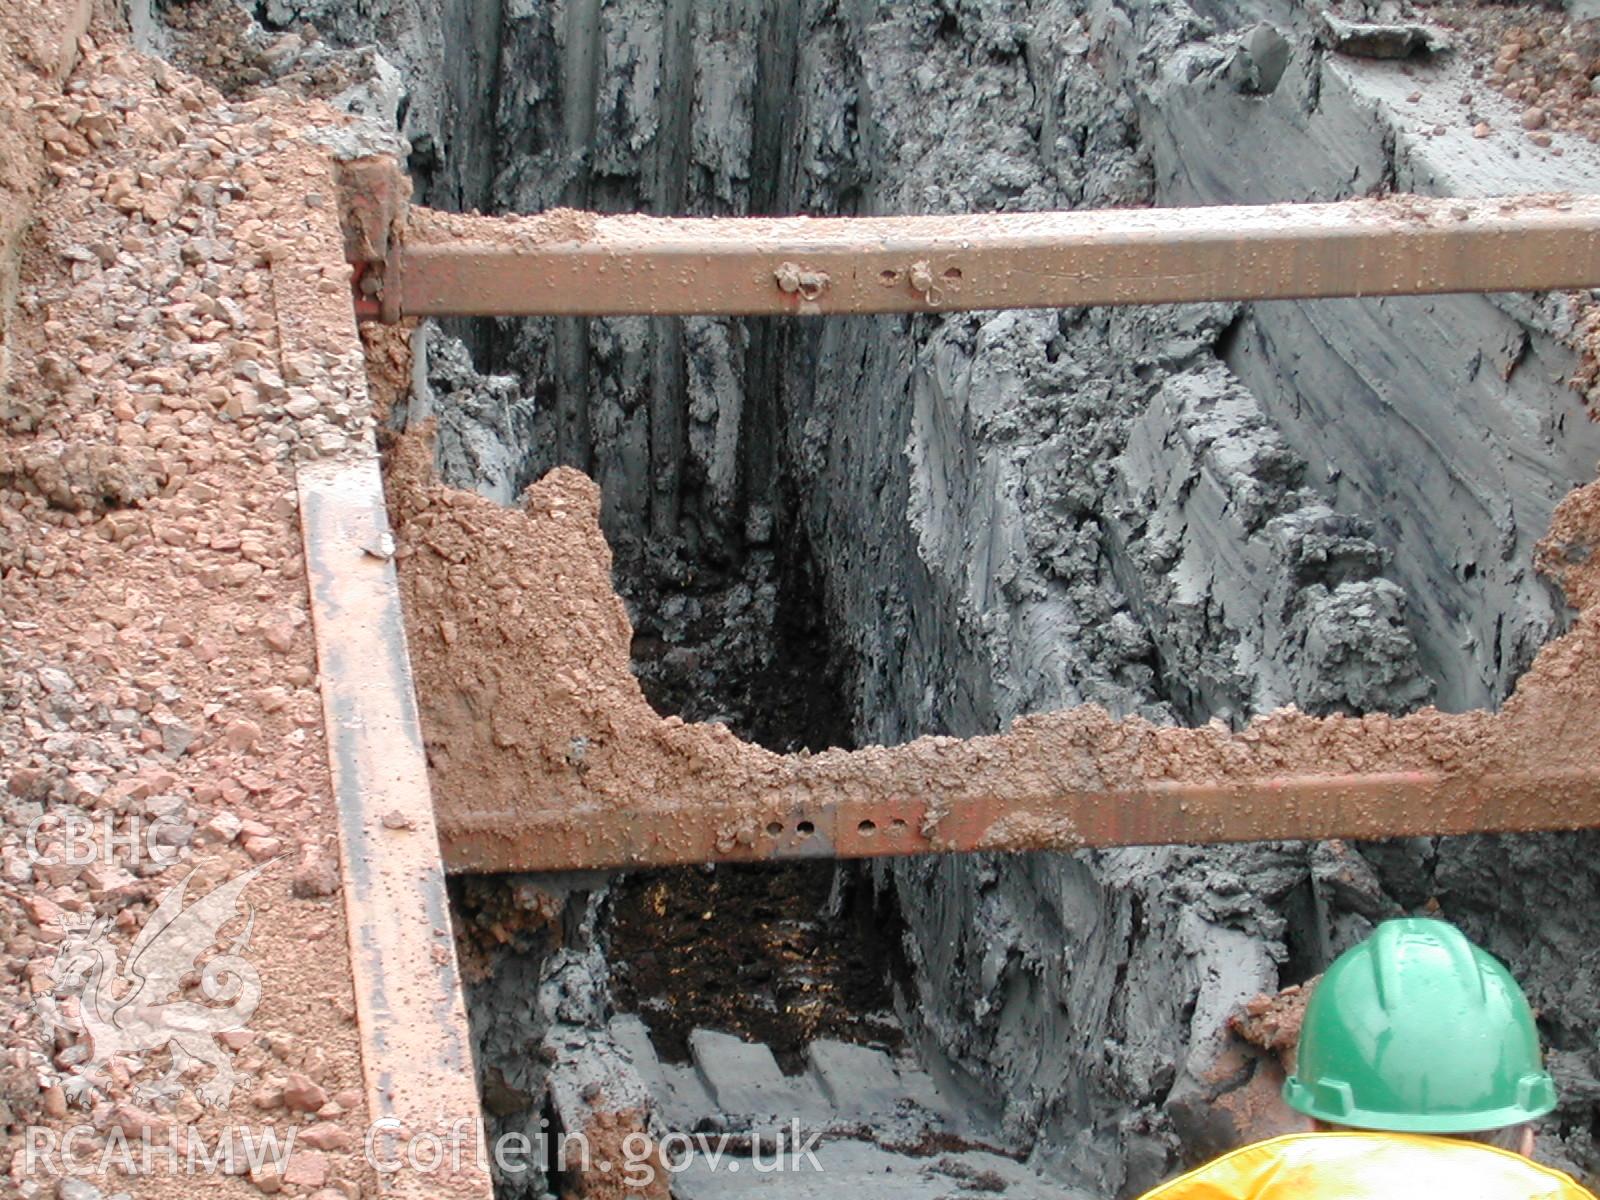 Colour digital photograph showing a deep peat layer at the base of a trench in the Ty Mawr Lane section, East terminal.